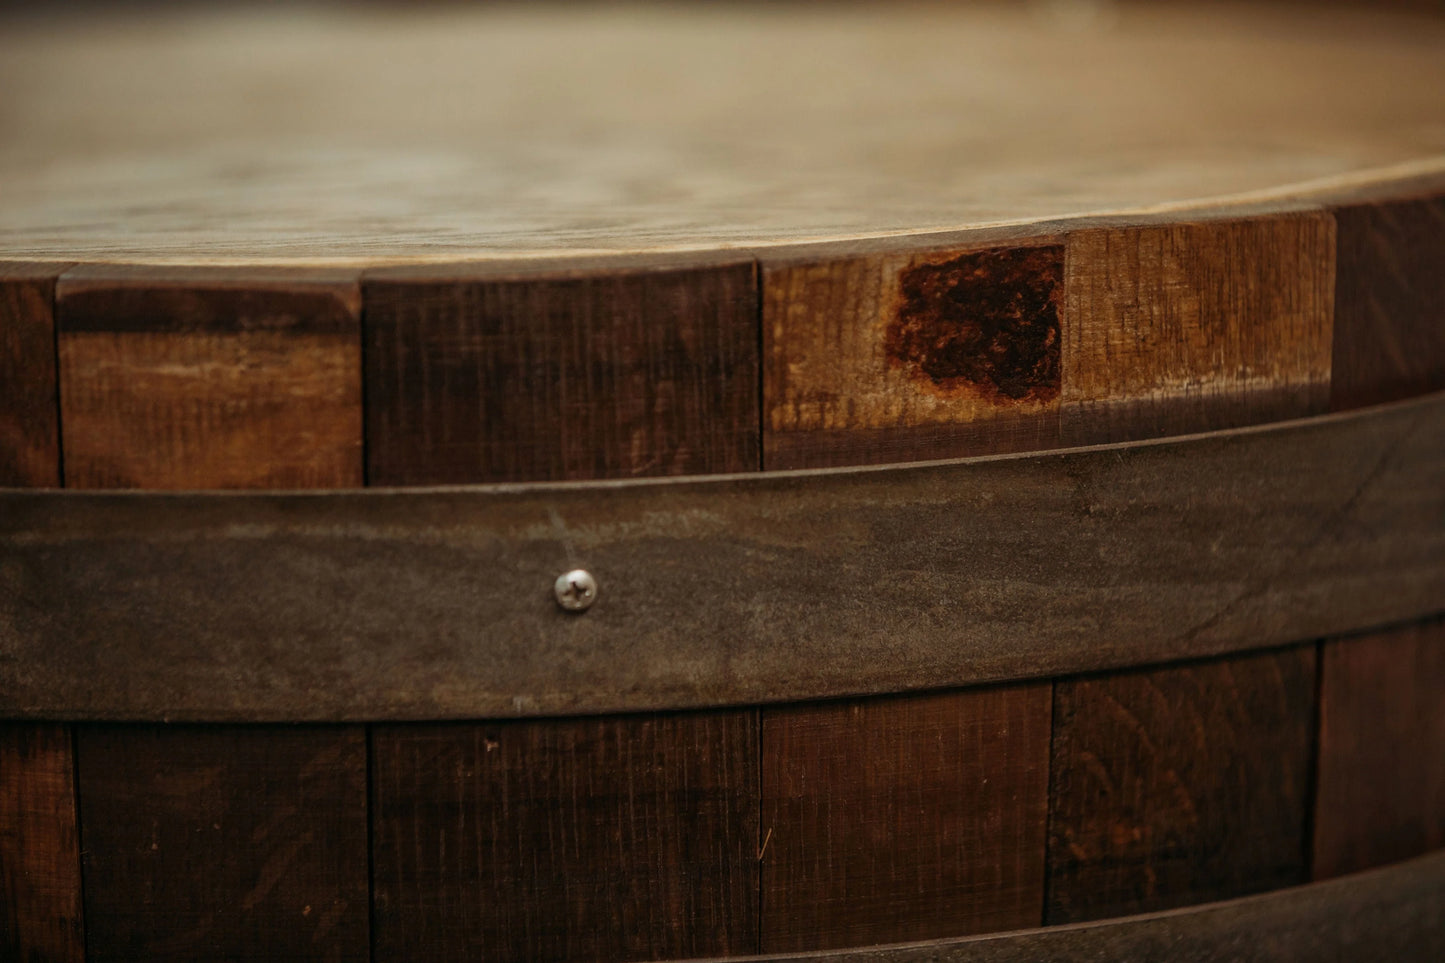 Close up of the wine barrel